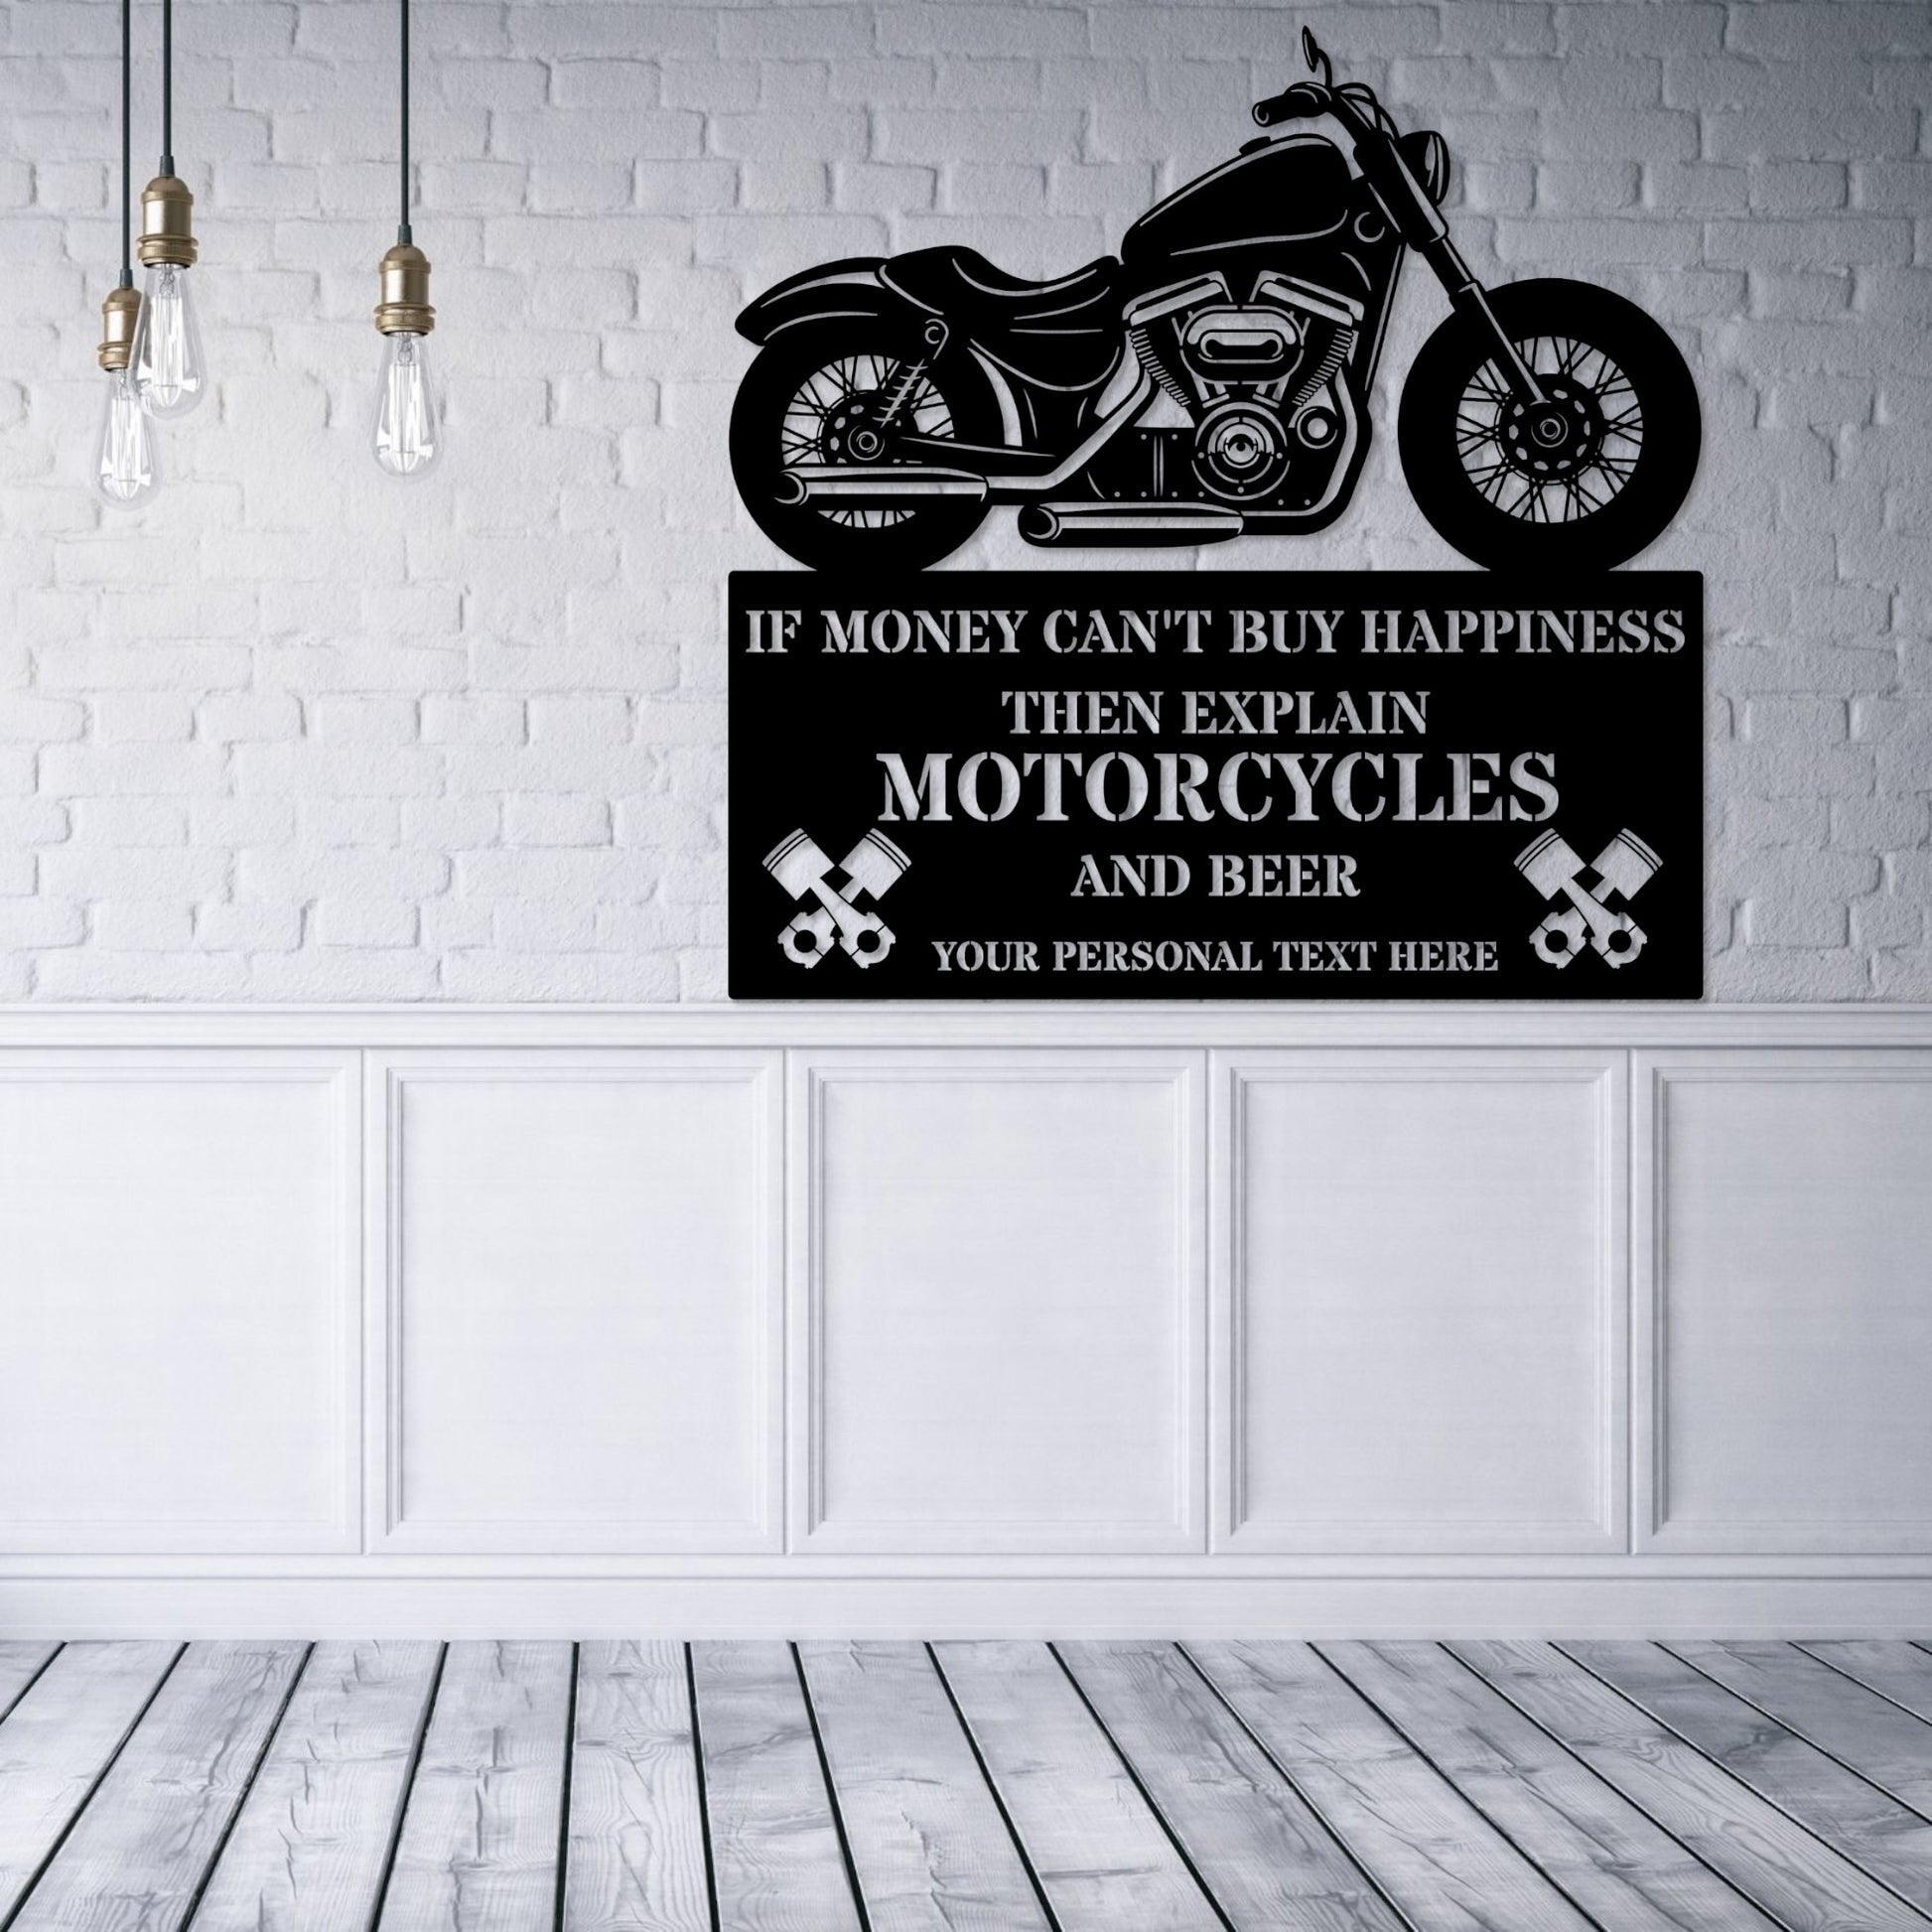 Personalized Motorcycle Name Metal Sign. Custom Biker Wall Decor Gift. Personal Vintage Motorbike Sign. Motorcyclist. Garage Wall Hanging